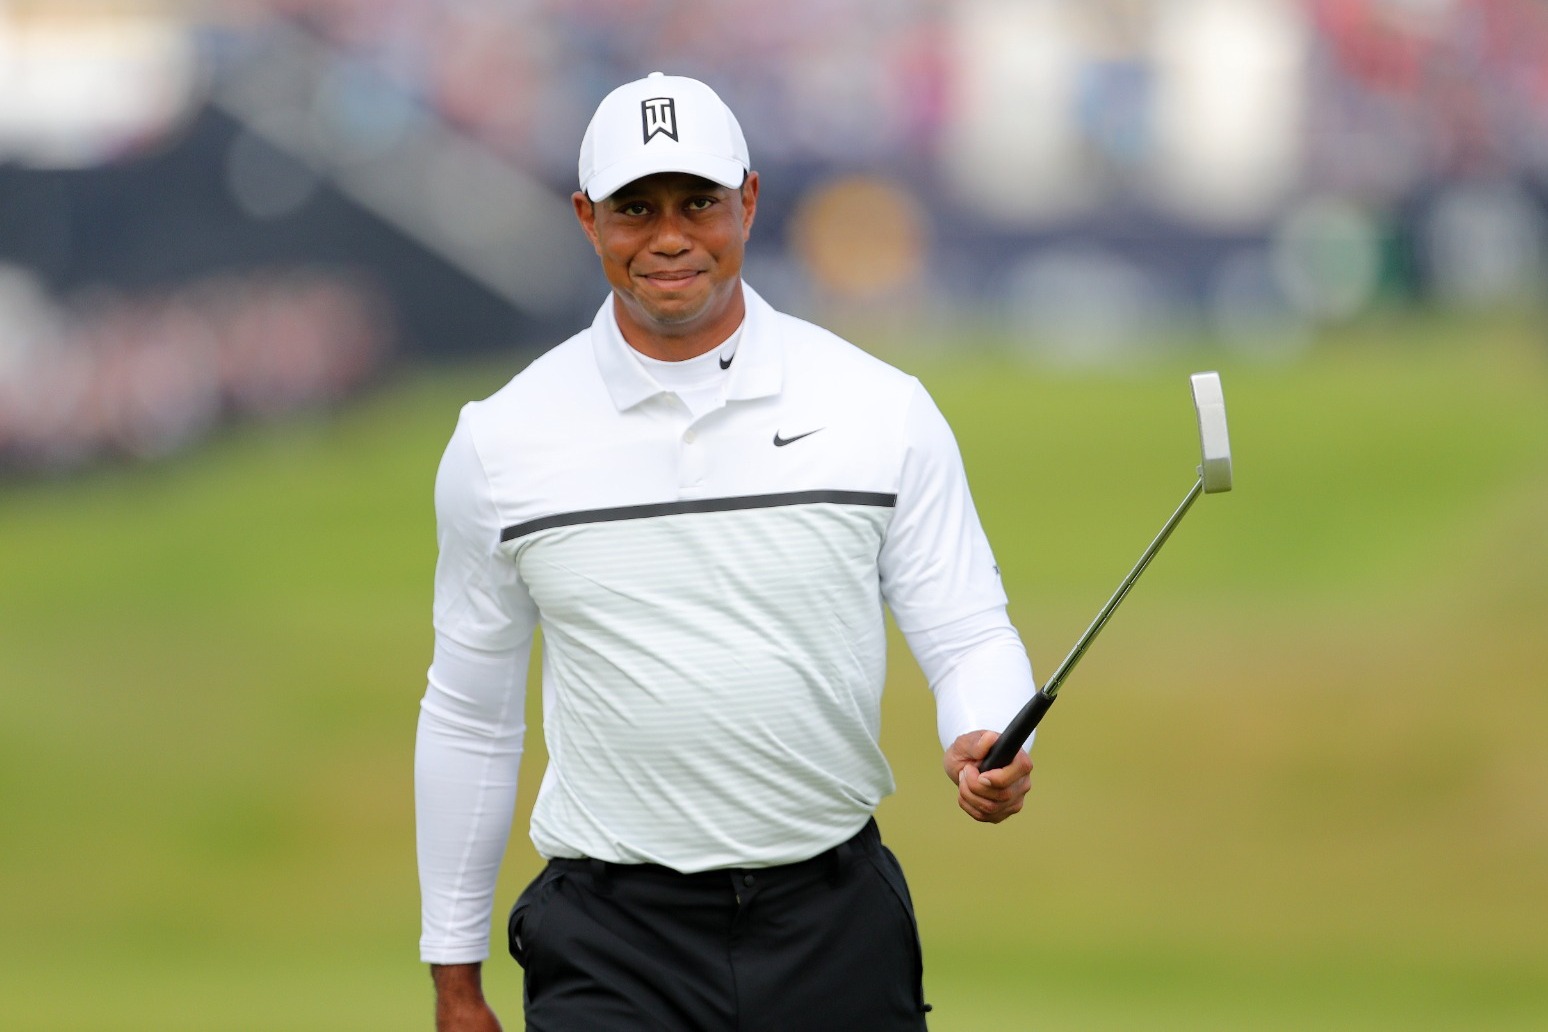 Tiger Woods becomes emotional during Golf Hall of Fame induction speech